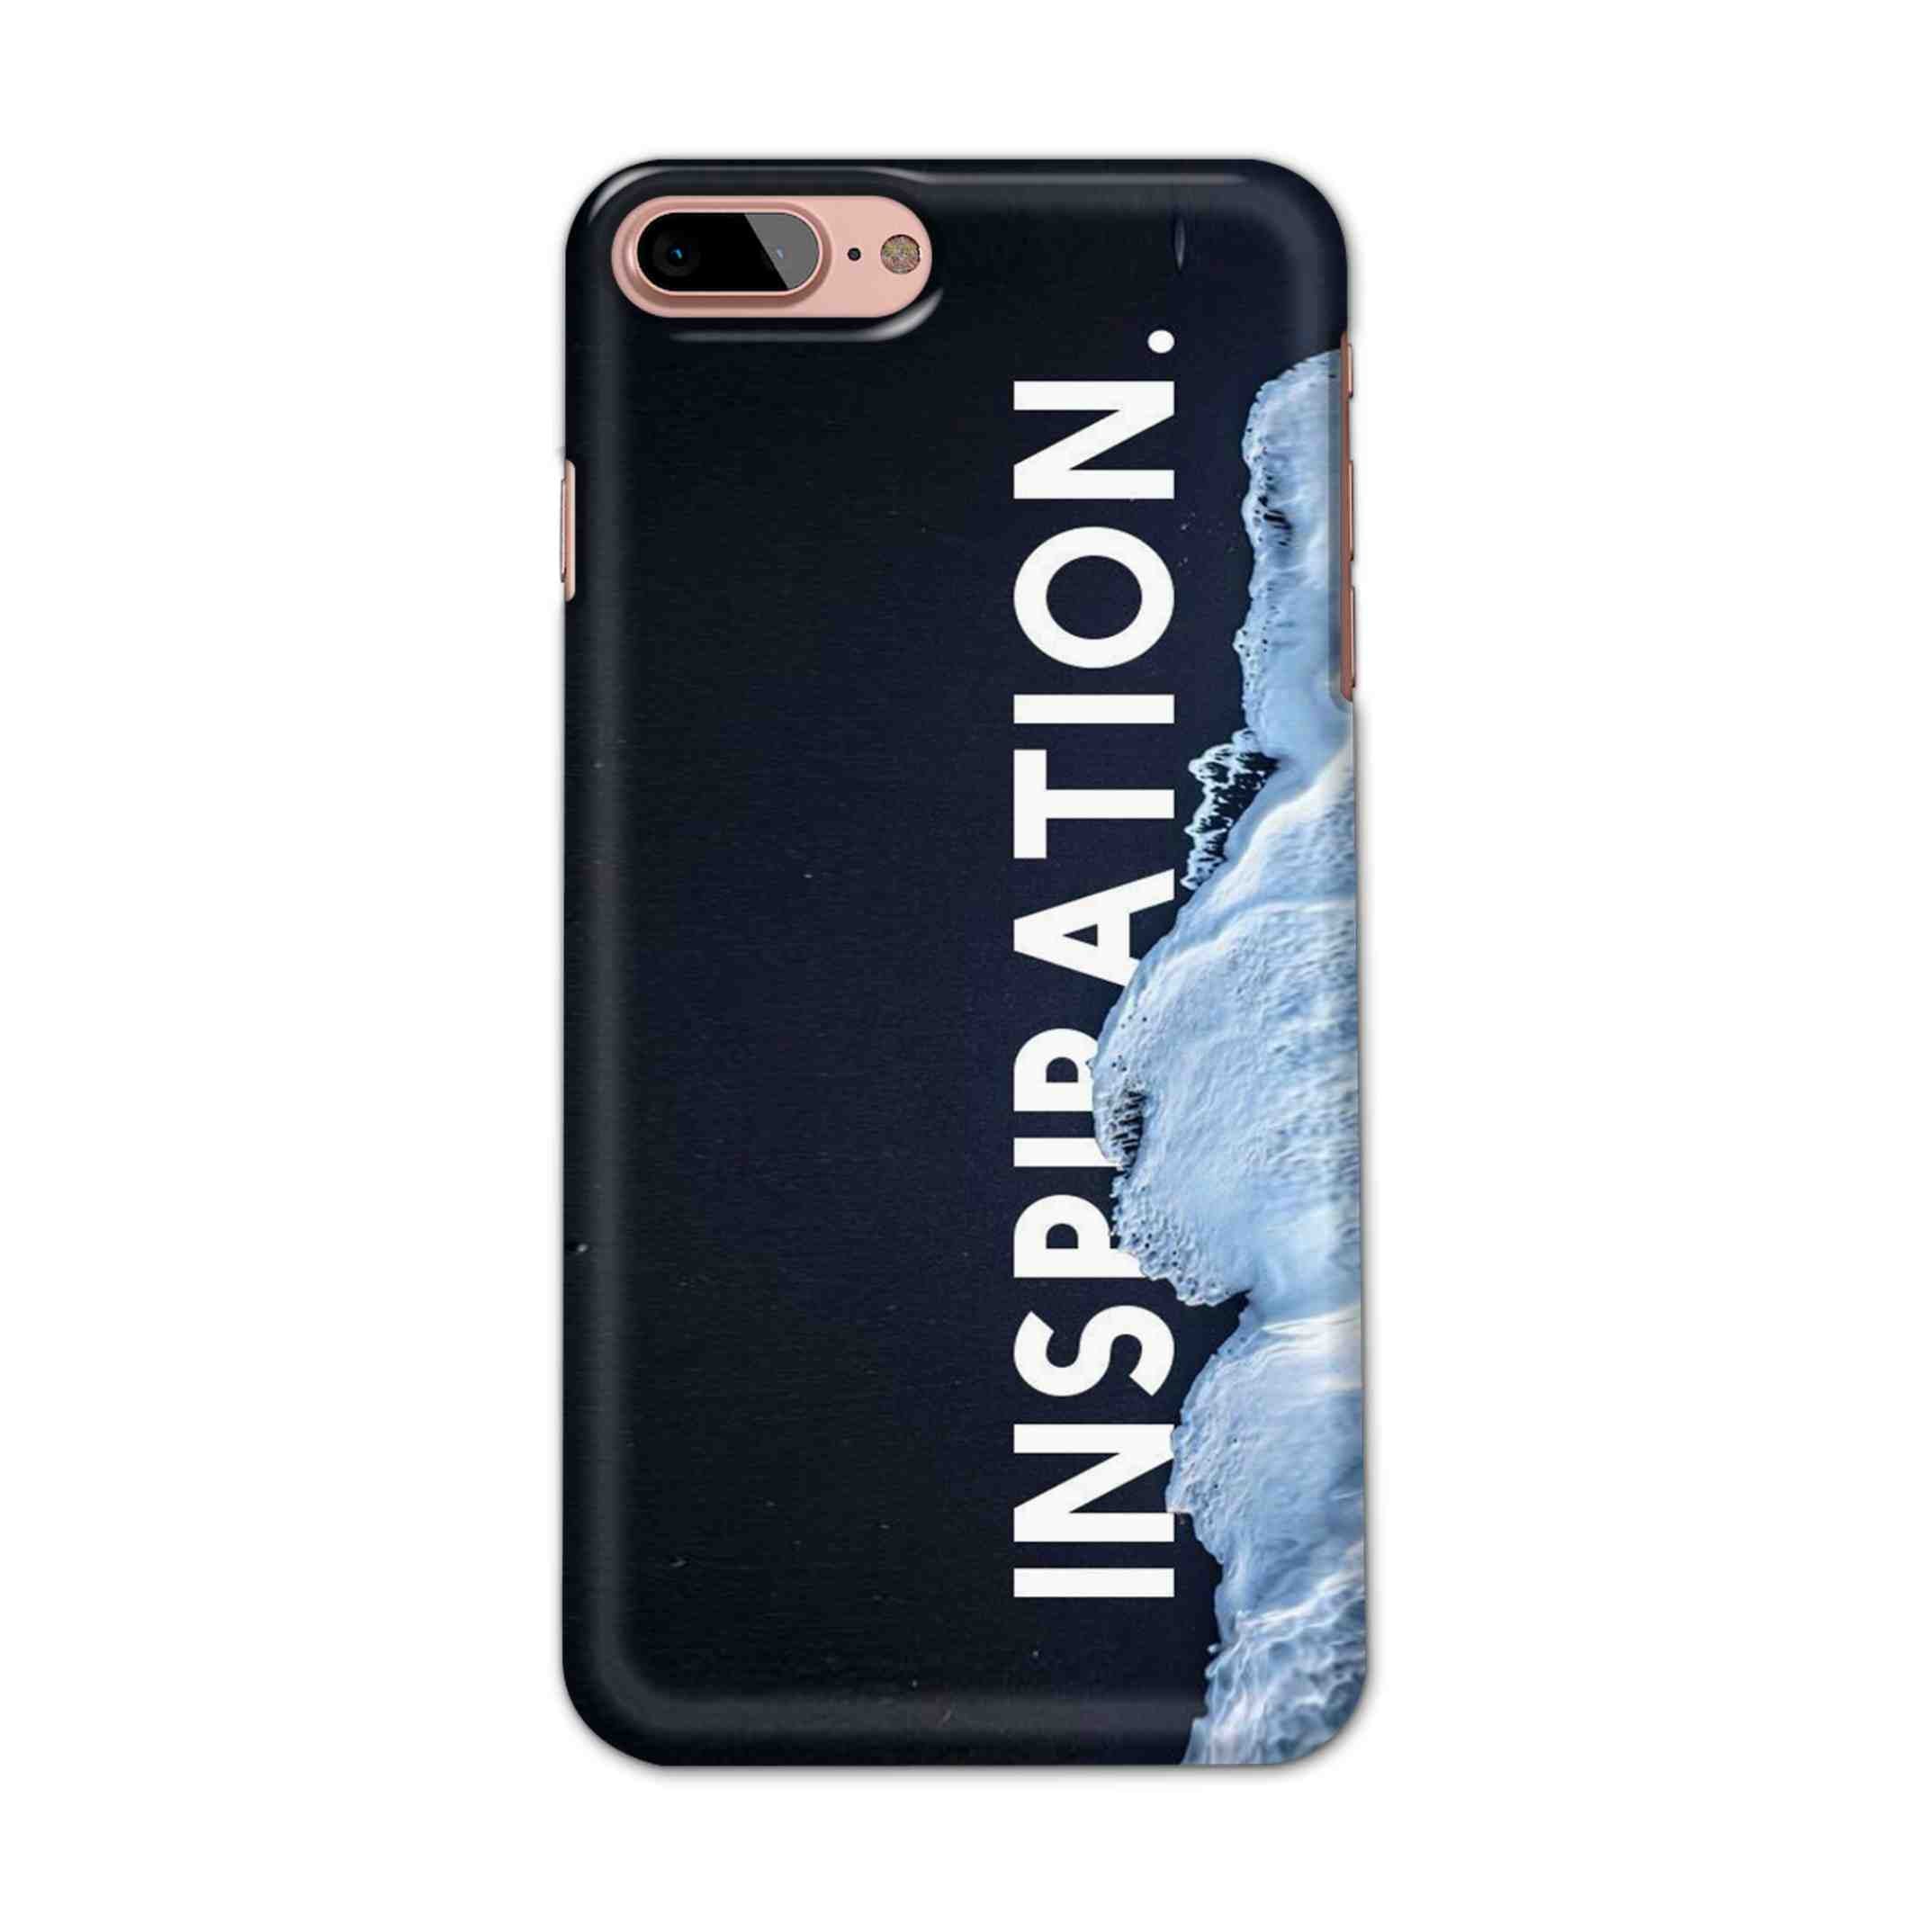 Buy Inspiration Hard Back Mobile Phone Case/Cover For iPhone 7 Plus / 8 Plus Online